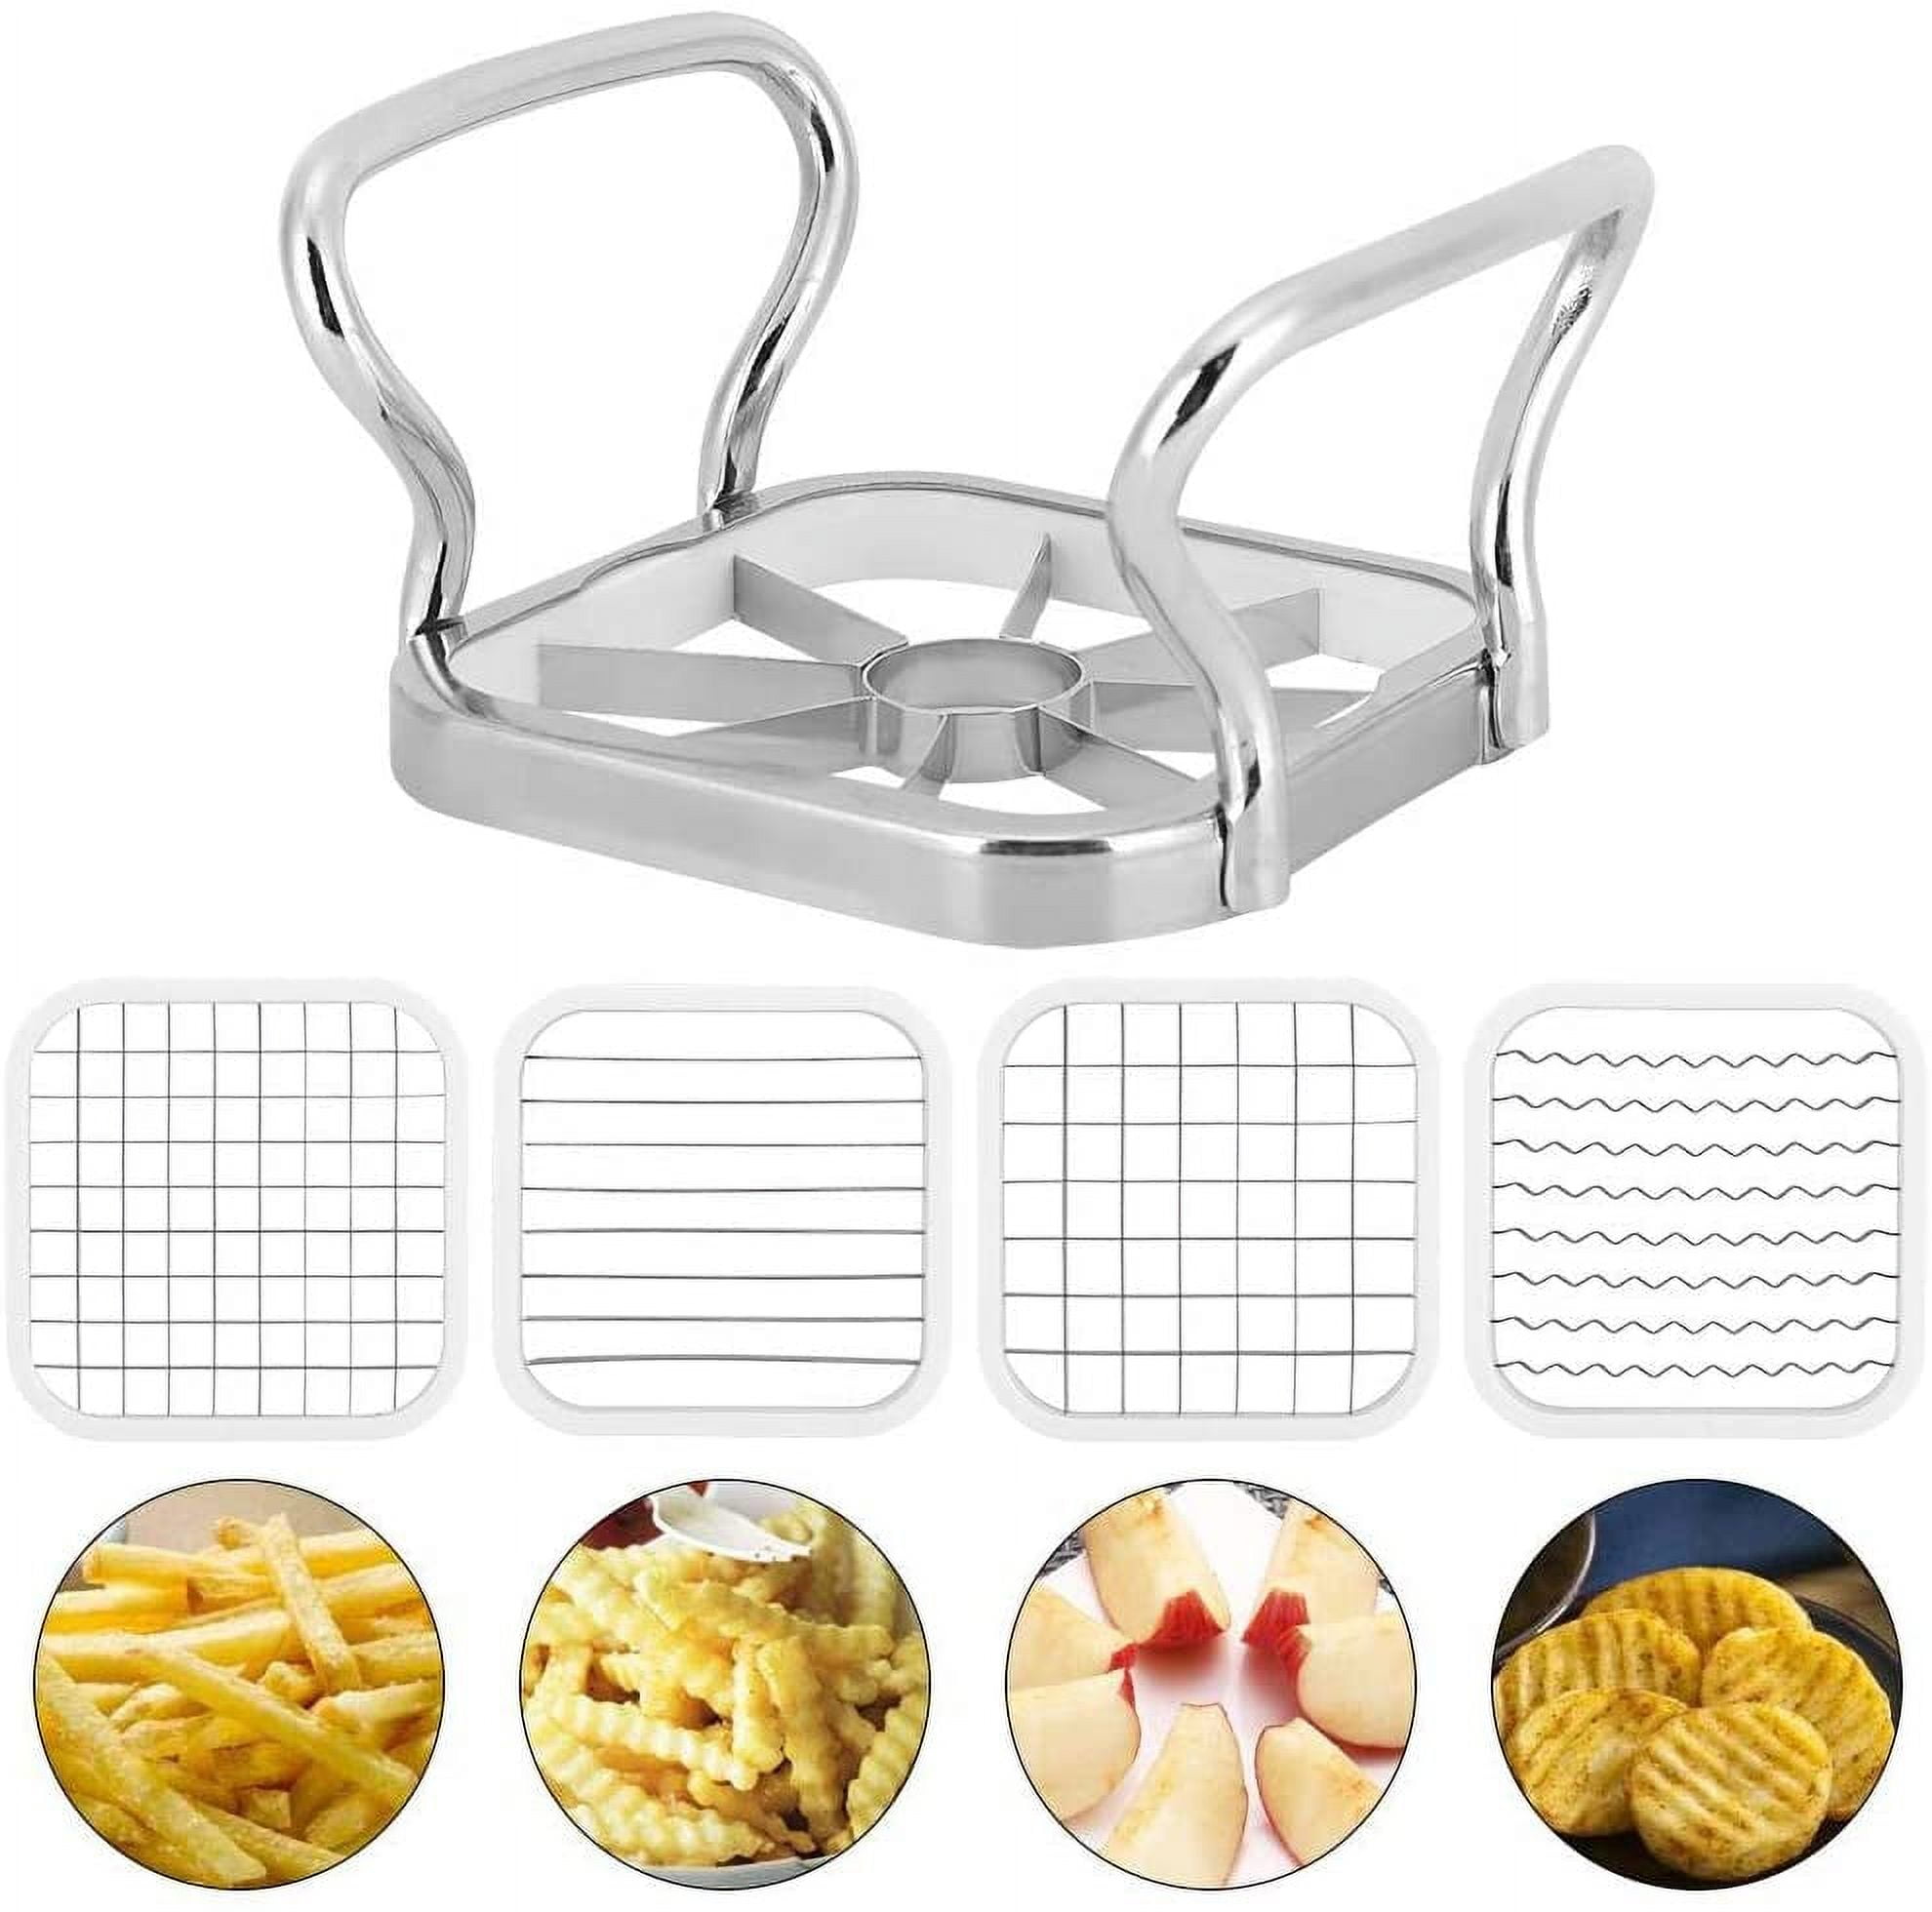 Exceptional Potato Chip Slicer At Unbeatable Discounts 